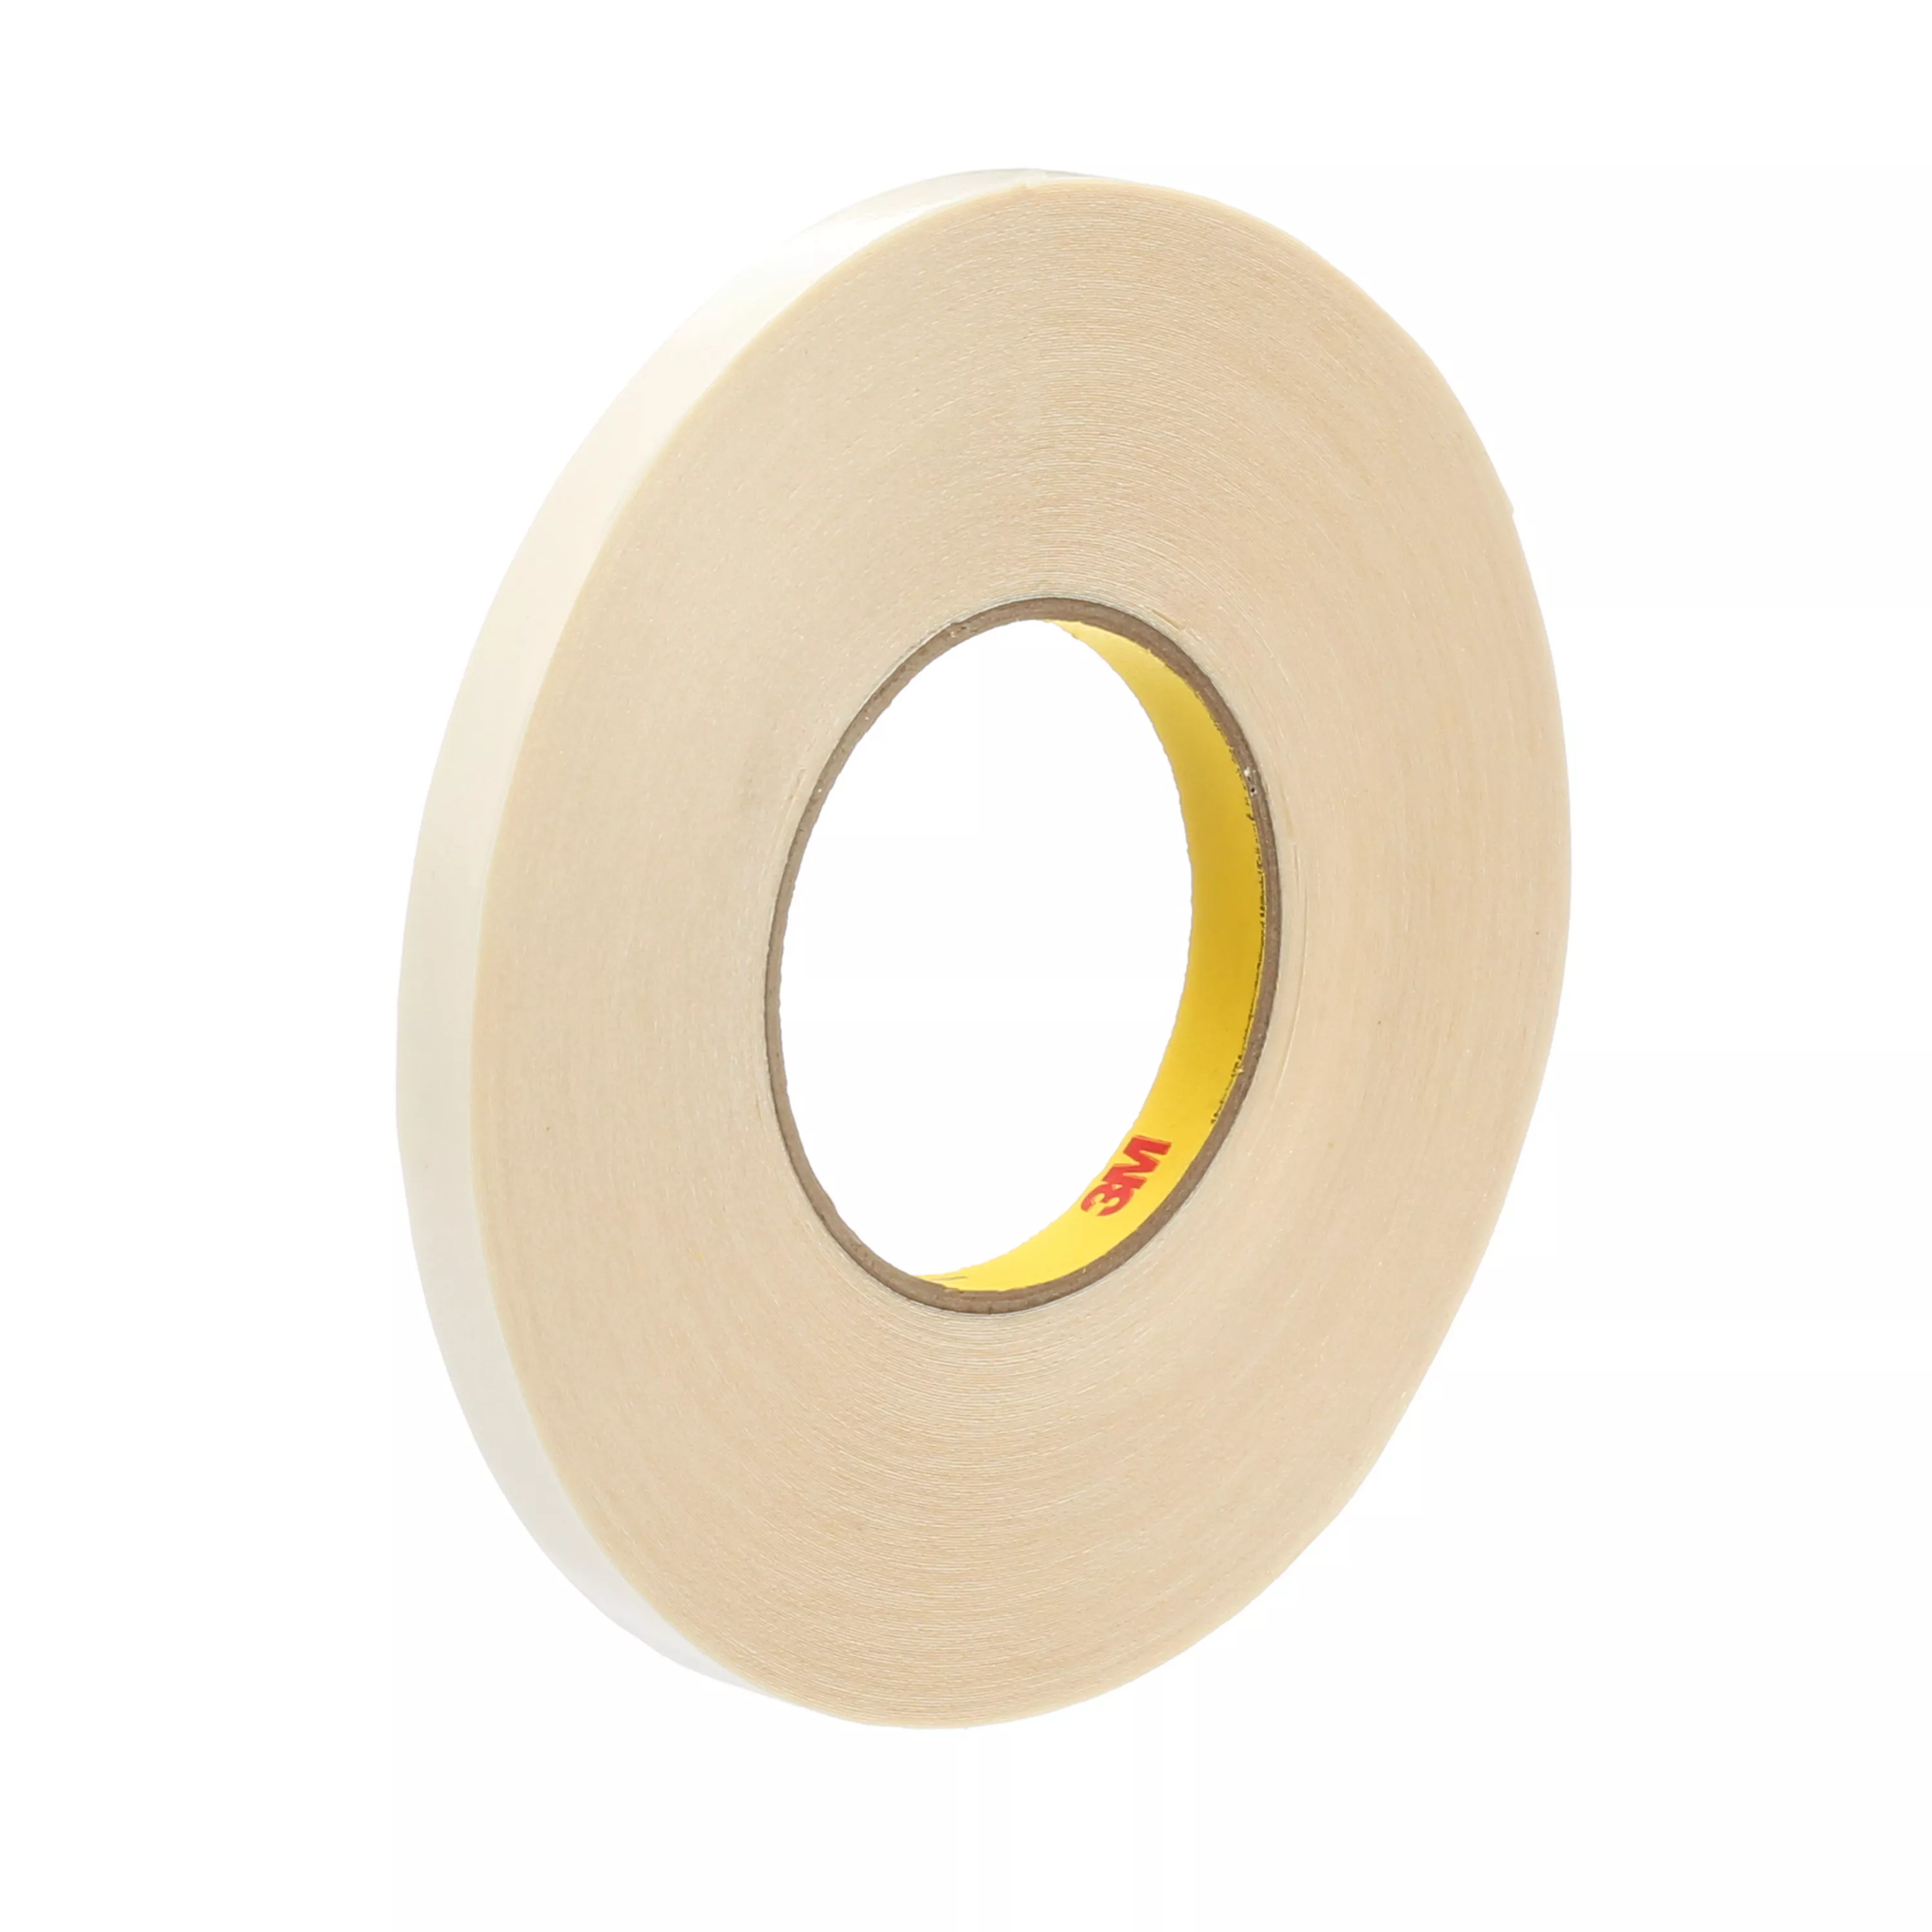 SKU 7100037557 | 3M™ Venture Tape™ Double Coated Tape 514CWR